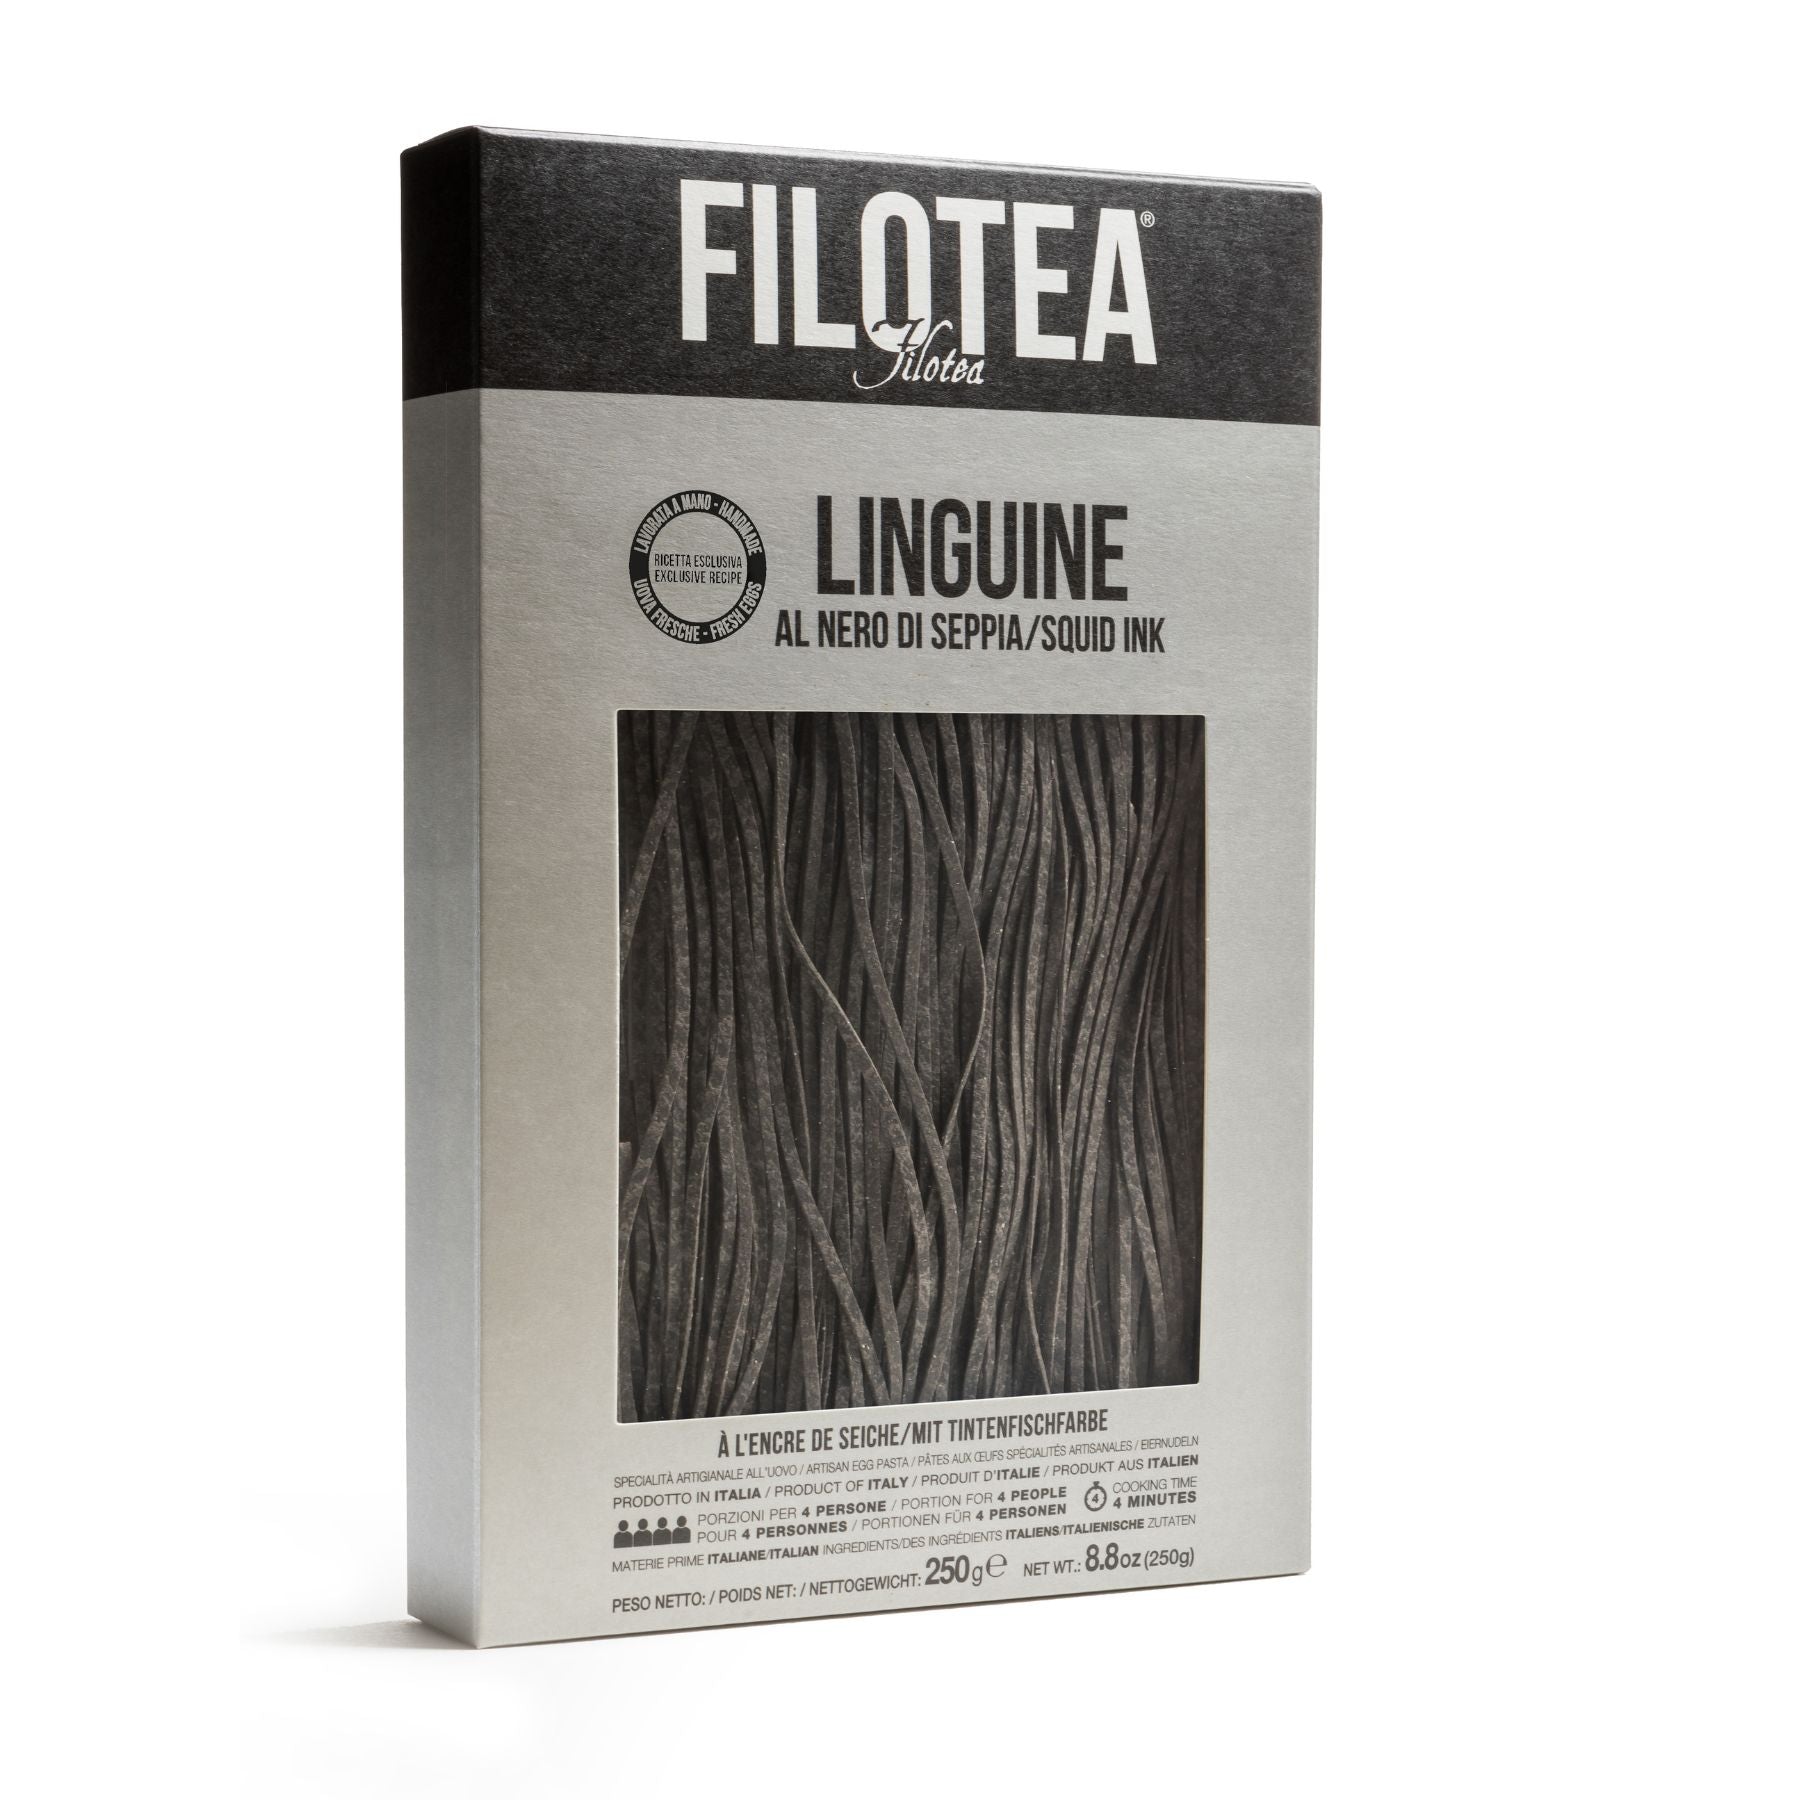 Filotea Squid Ink Linguine Artisan Egg Pasta 250g | Imported and distributed in the UK by Just Gourmet Foods